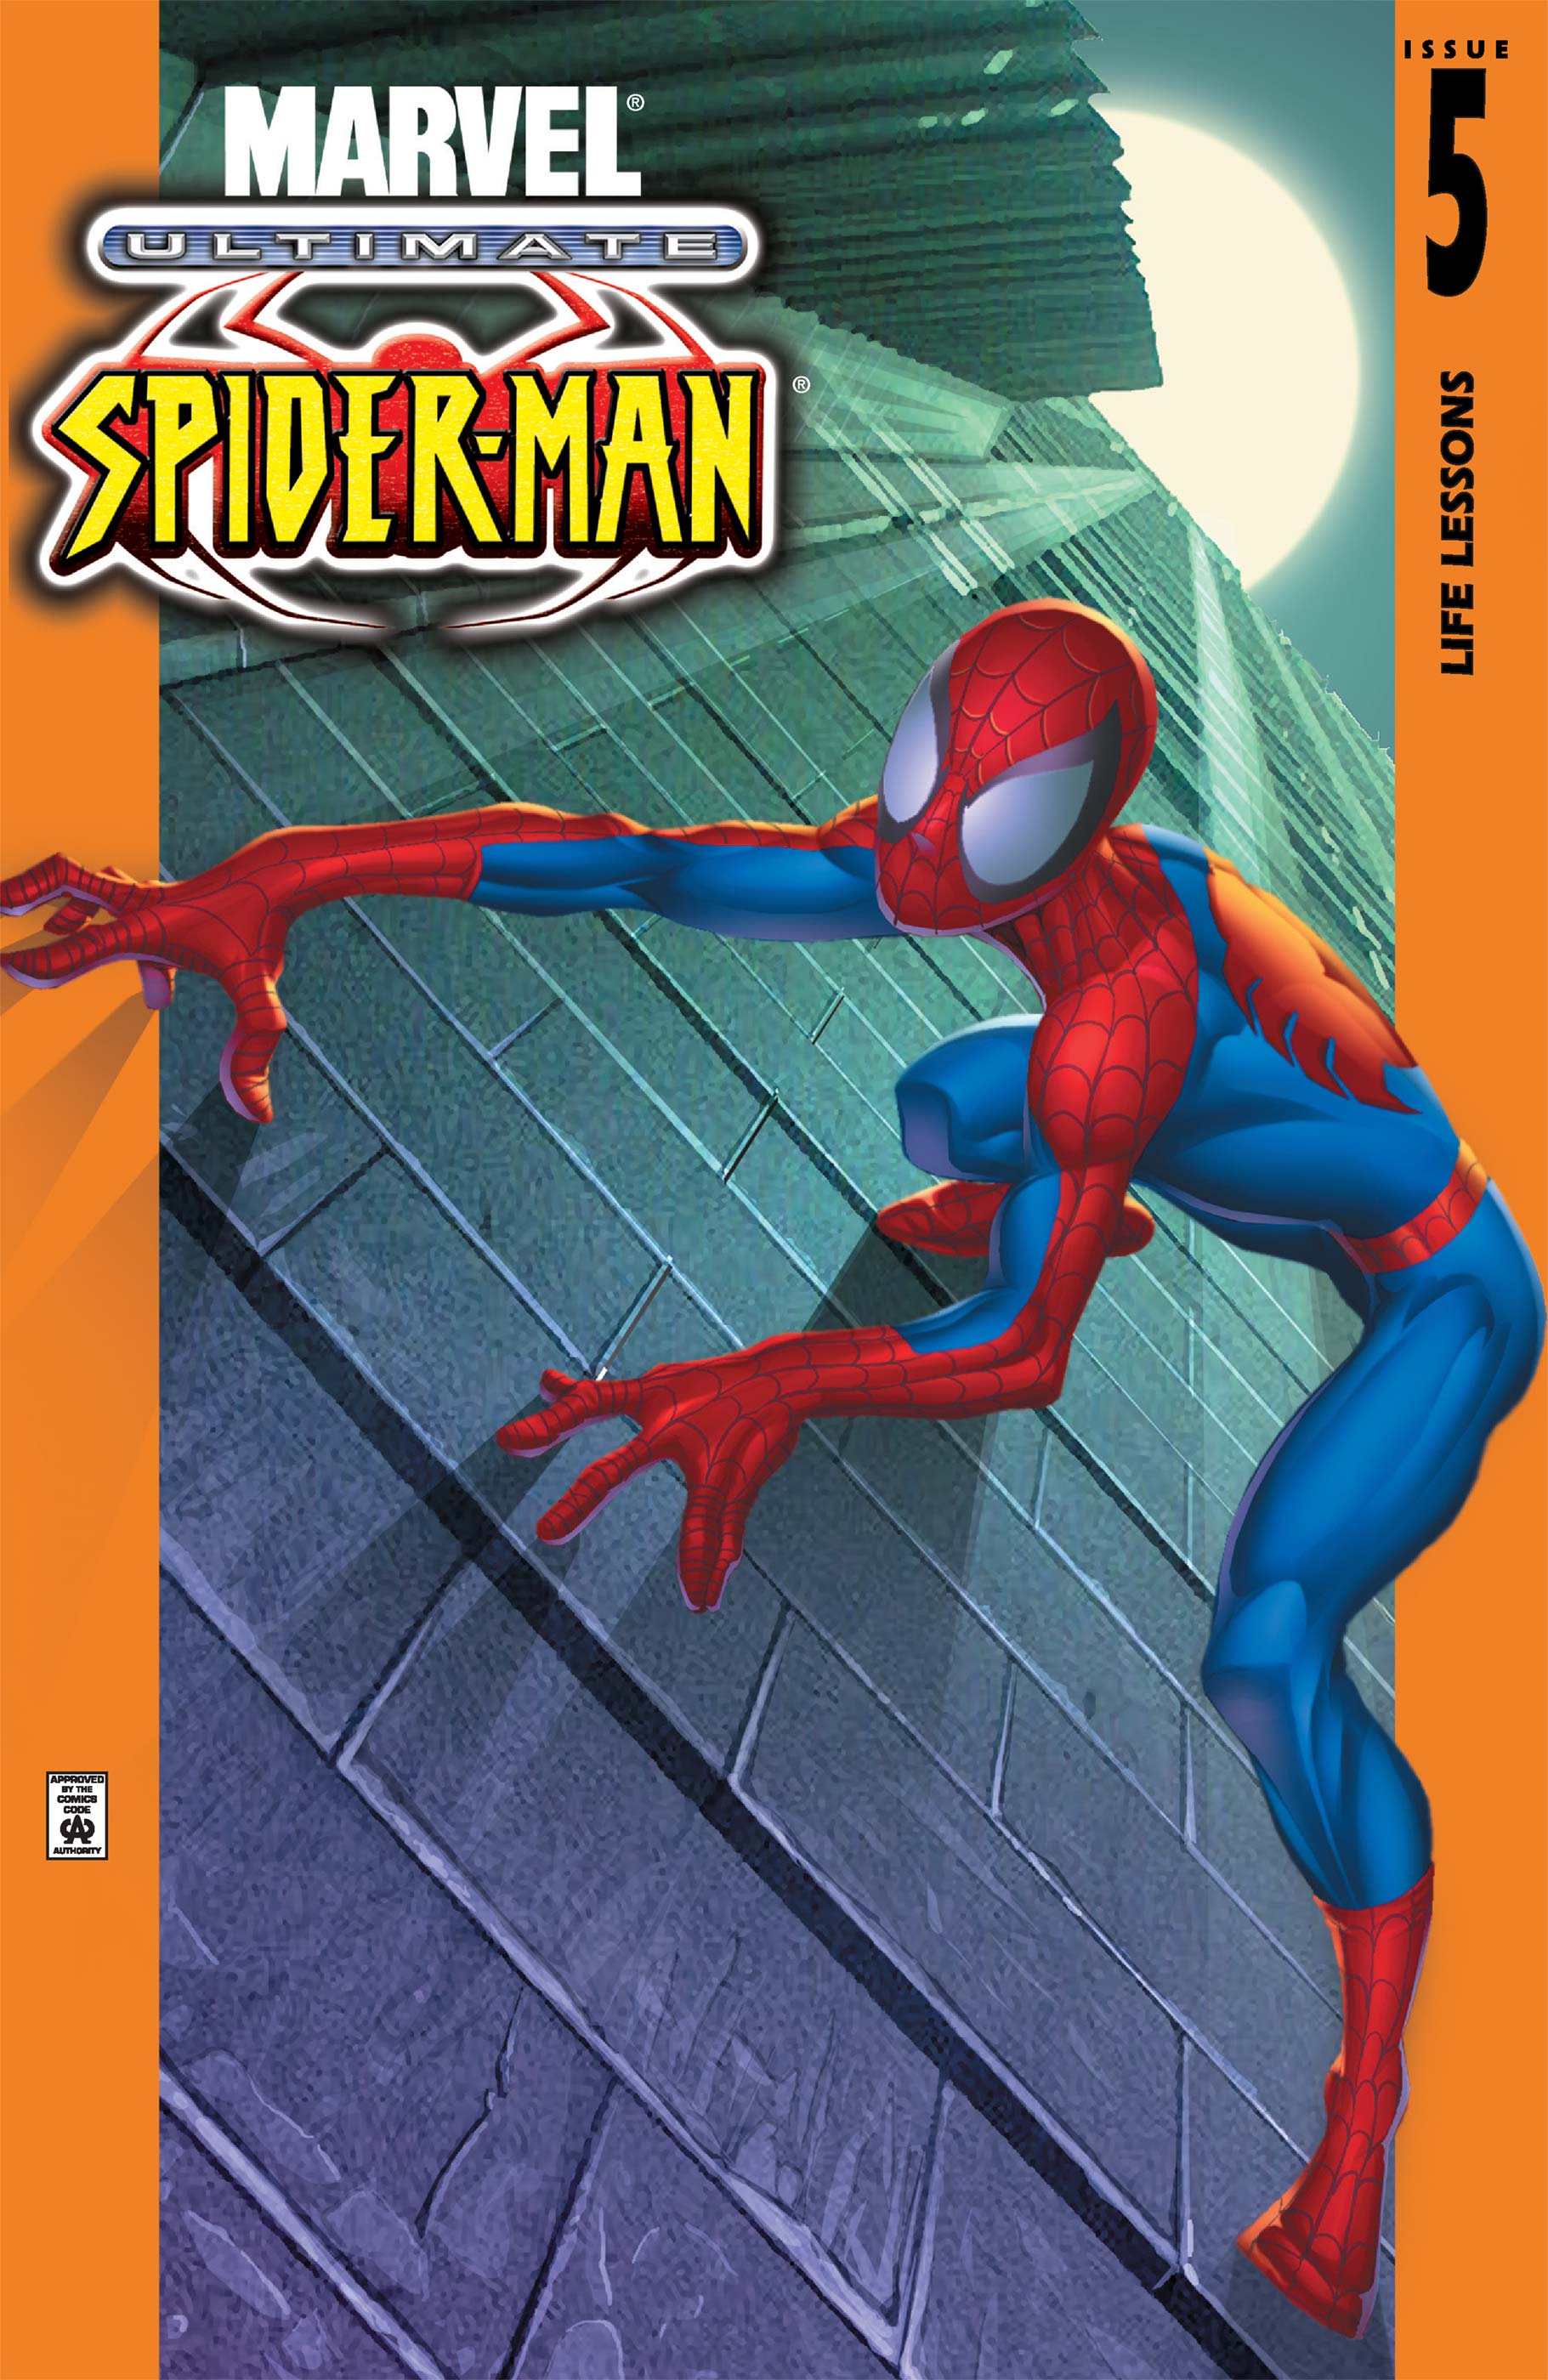 Ultimate Spider-Man (2000) #5 | Comic Issues | Marvel